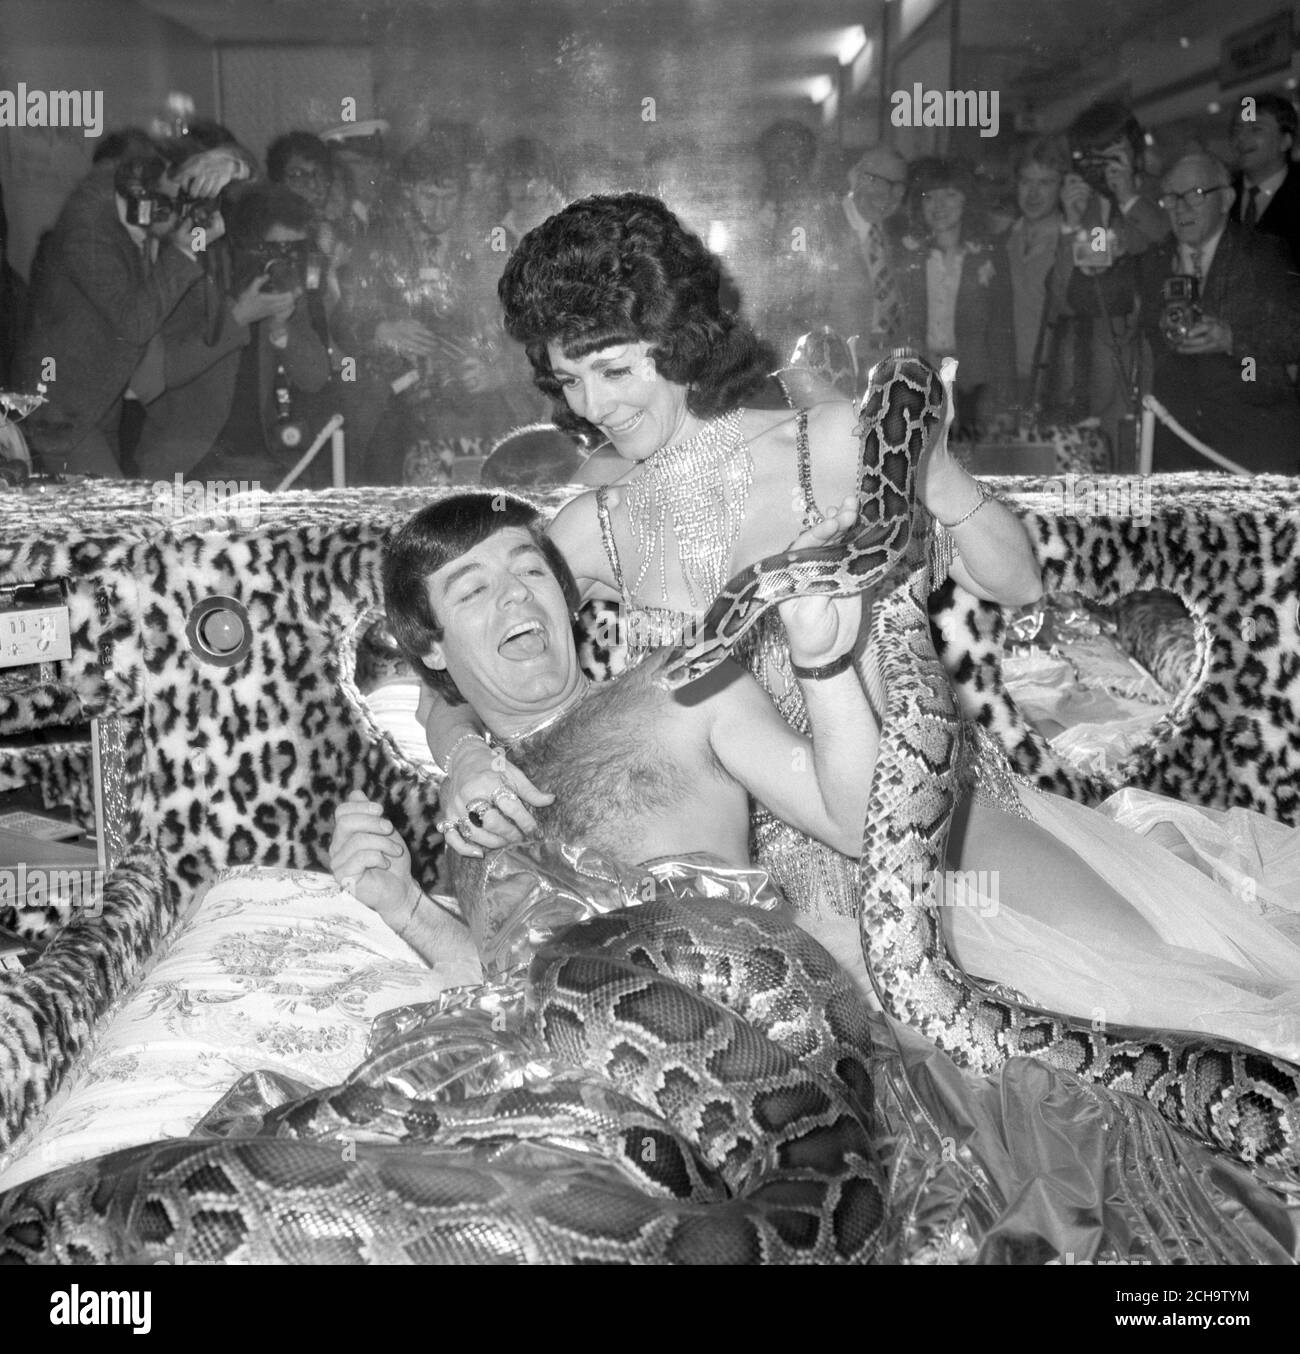 Radio DJ Tony Blackburn is joined by the slithery pets of snake dancer Sheba as he tries out what is claimed to be the most luxurious bed ever built. The 'Queen of Sheba' bed by Valentino is on view at the Daily Mail Ideal Home Exhibition at Earl's Court, London. It features record and cassette decks, a TV, video recorder, a fridge, and a hidden machine that releases exotic perfumes at given intervals. Stock Photo